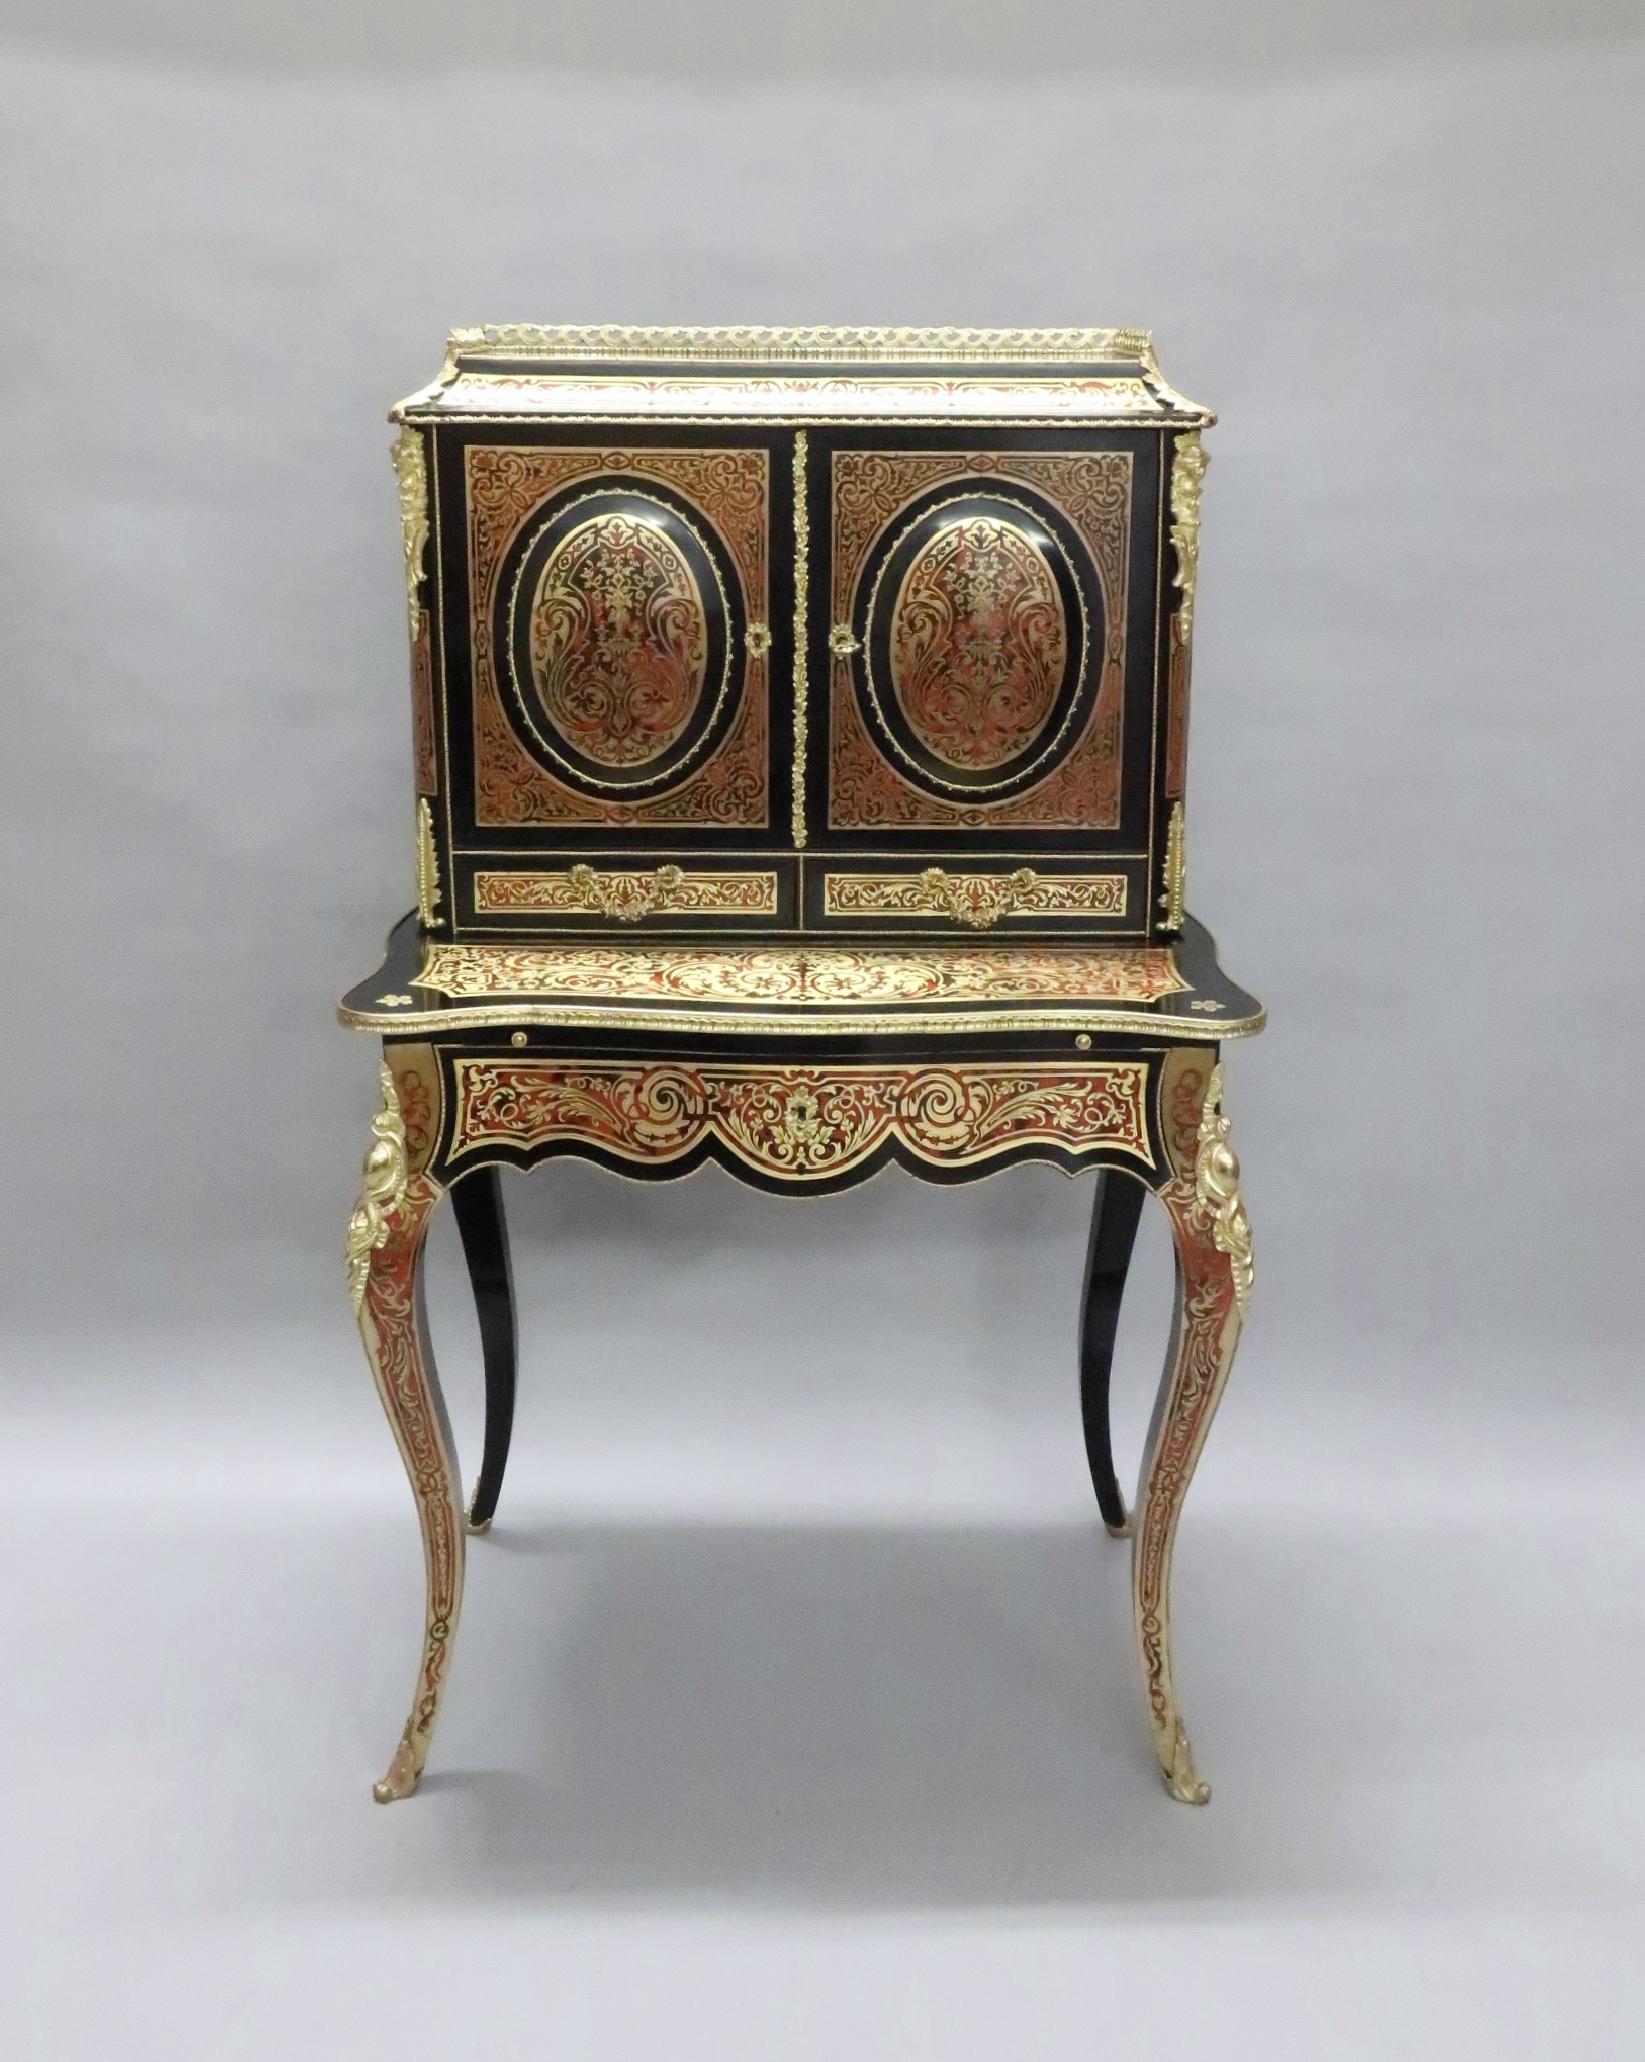 A fabulous quality French Louis XV style ebonized boulle red tortoiseshell and engraved brass Bonheur du jour writing cabinet with domed oval panels to the doors and serpentine shaped based with square tapering cabriole legs. There are two drawers